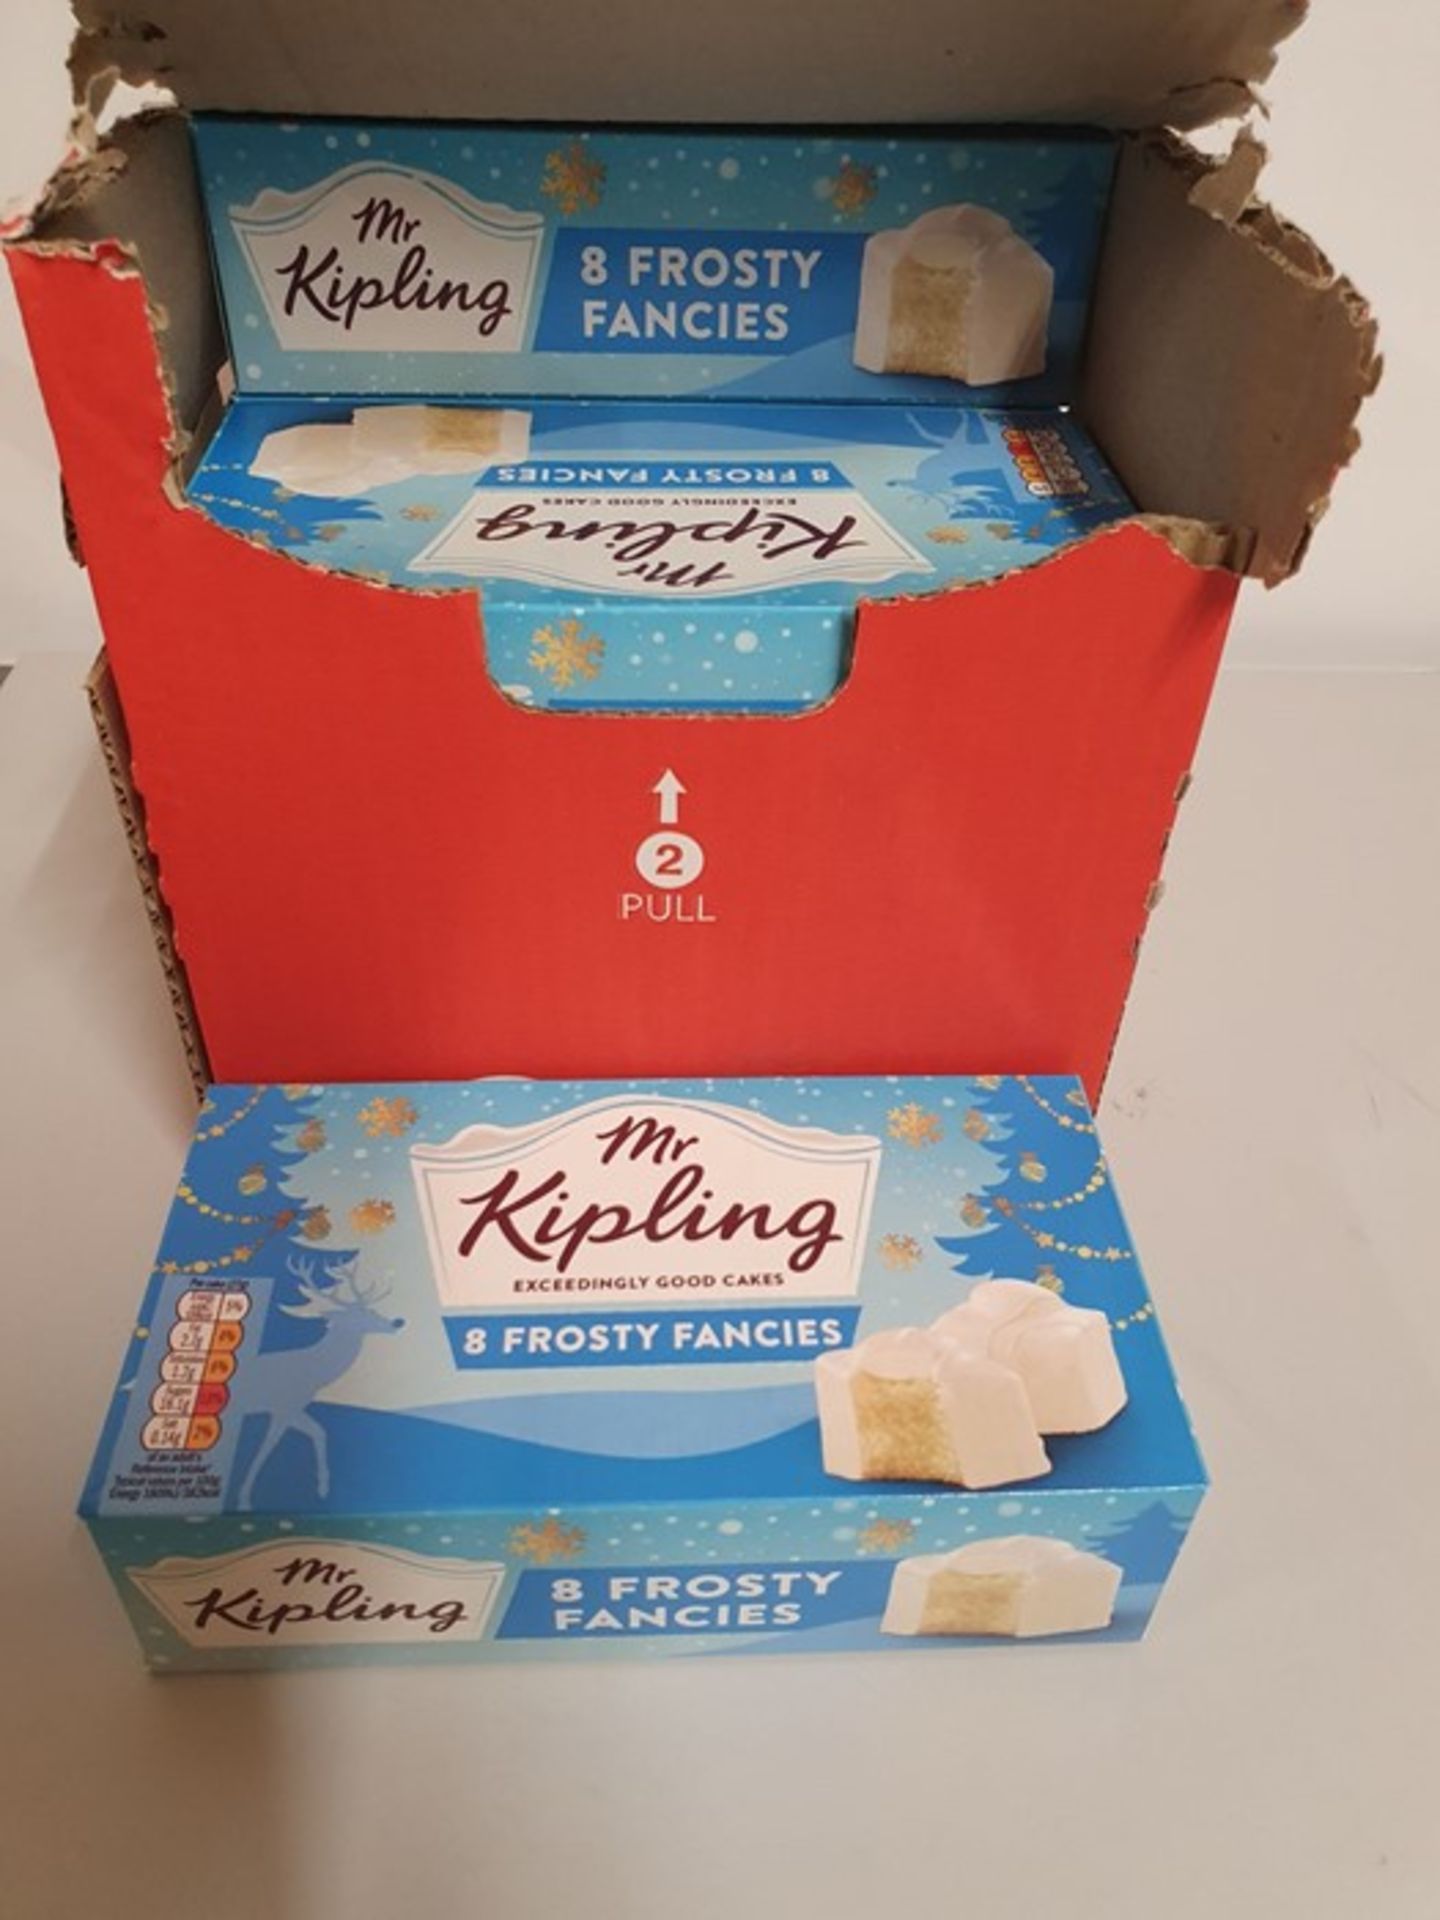 ONE LOT TO CONTAN ONE BOX OF MR KIPLINGS FROSTED FANCIES. 12 PACKS PER BOX. 8 CAKES IN EACH PACK.